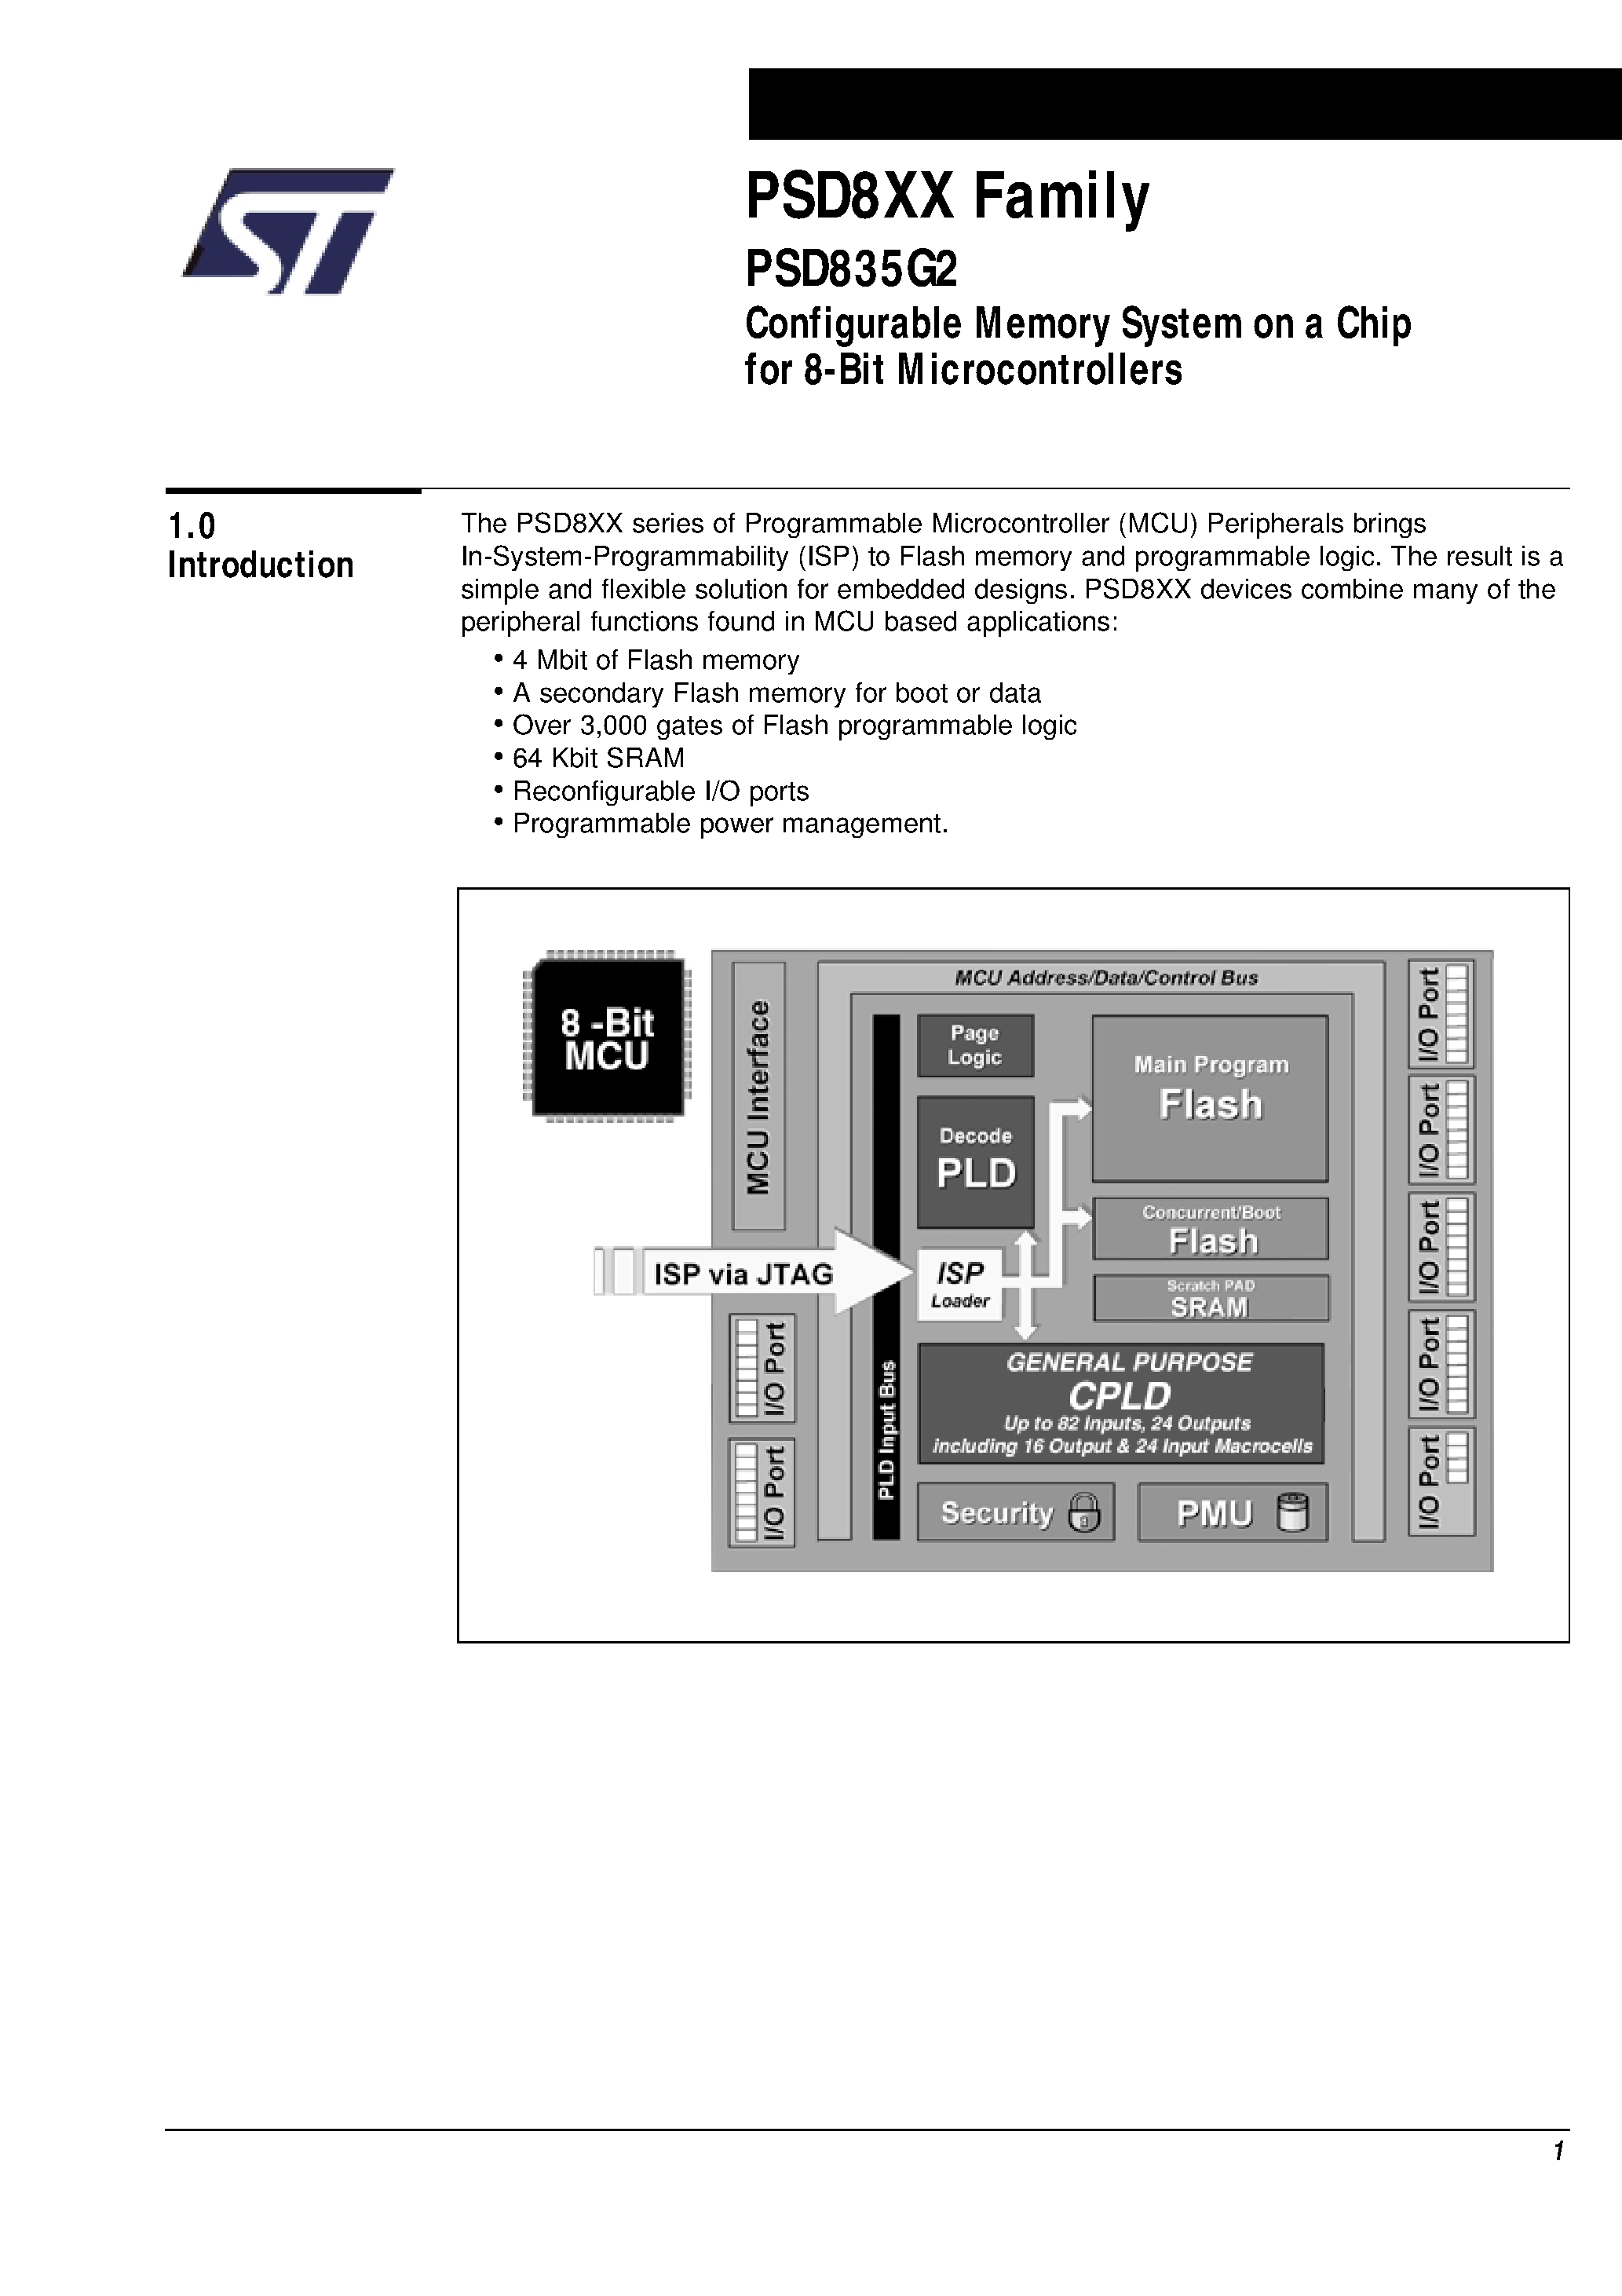 Datasheet PSD835F2-A-15M - Configurable Memory System on a Chip for 8-Bit Microcontrollers page 2